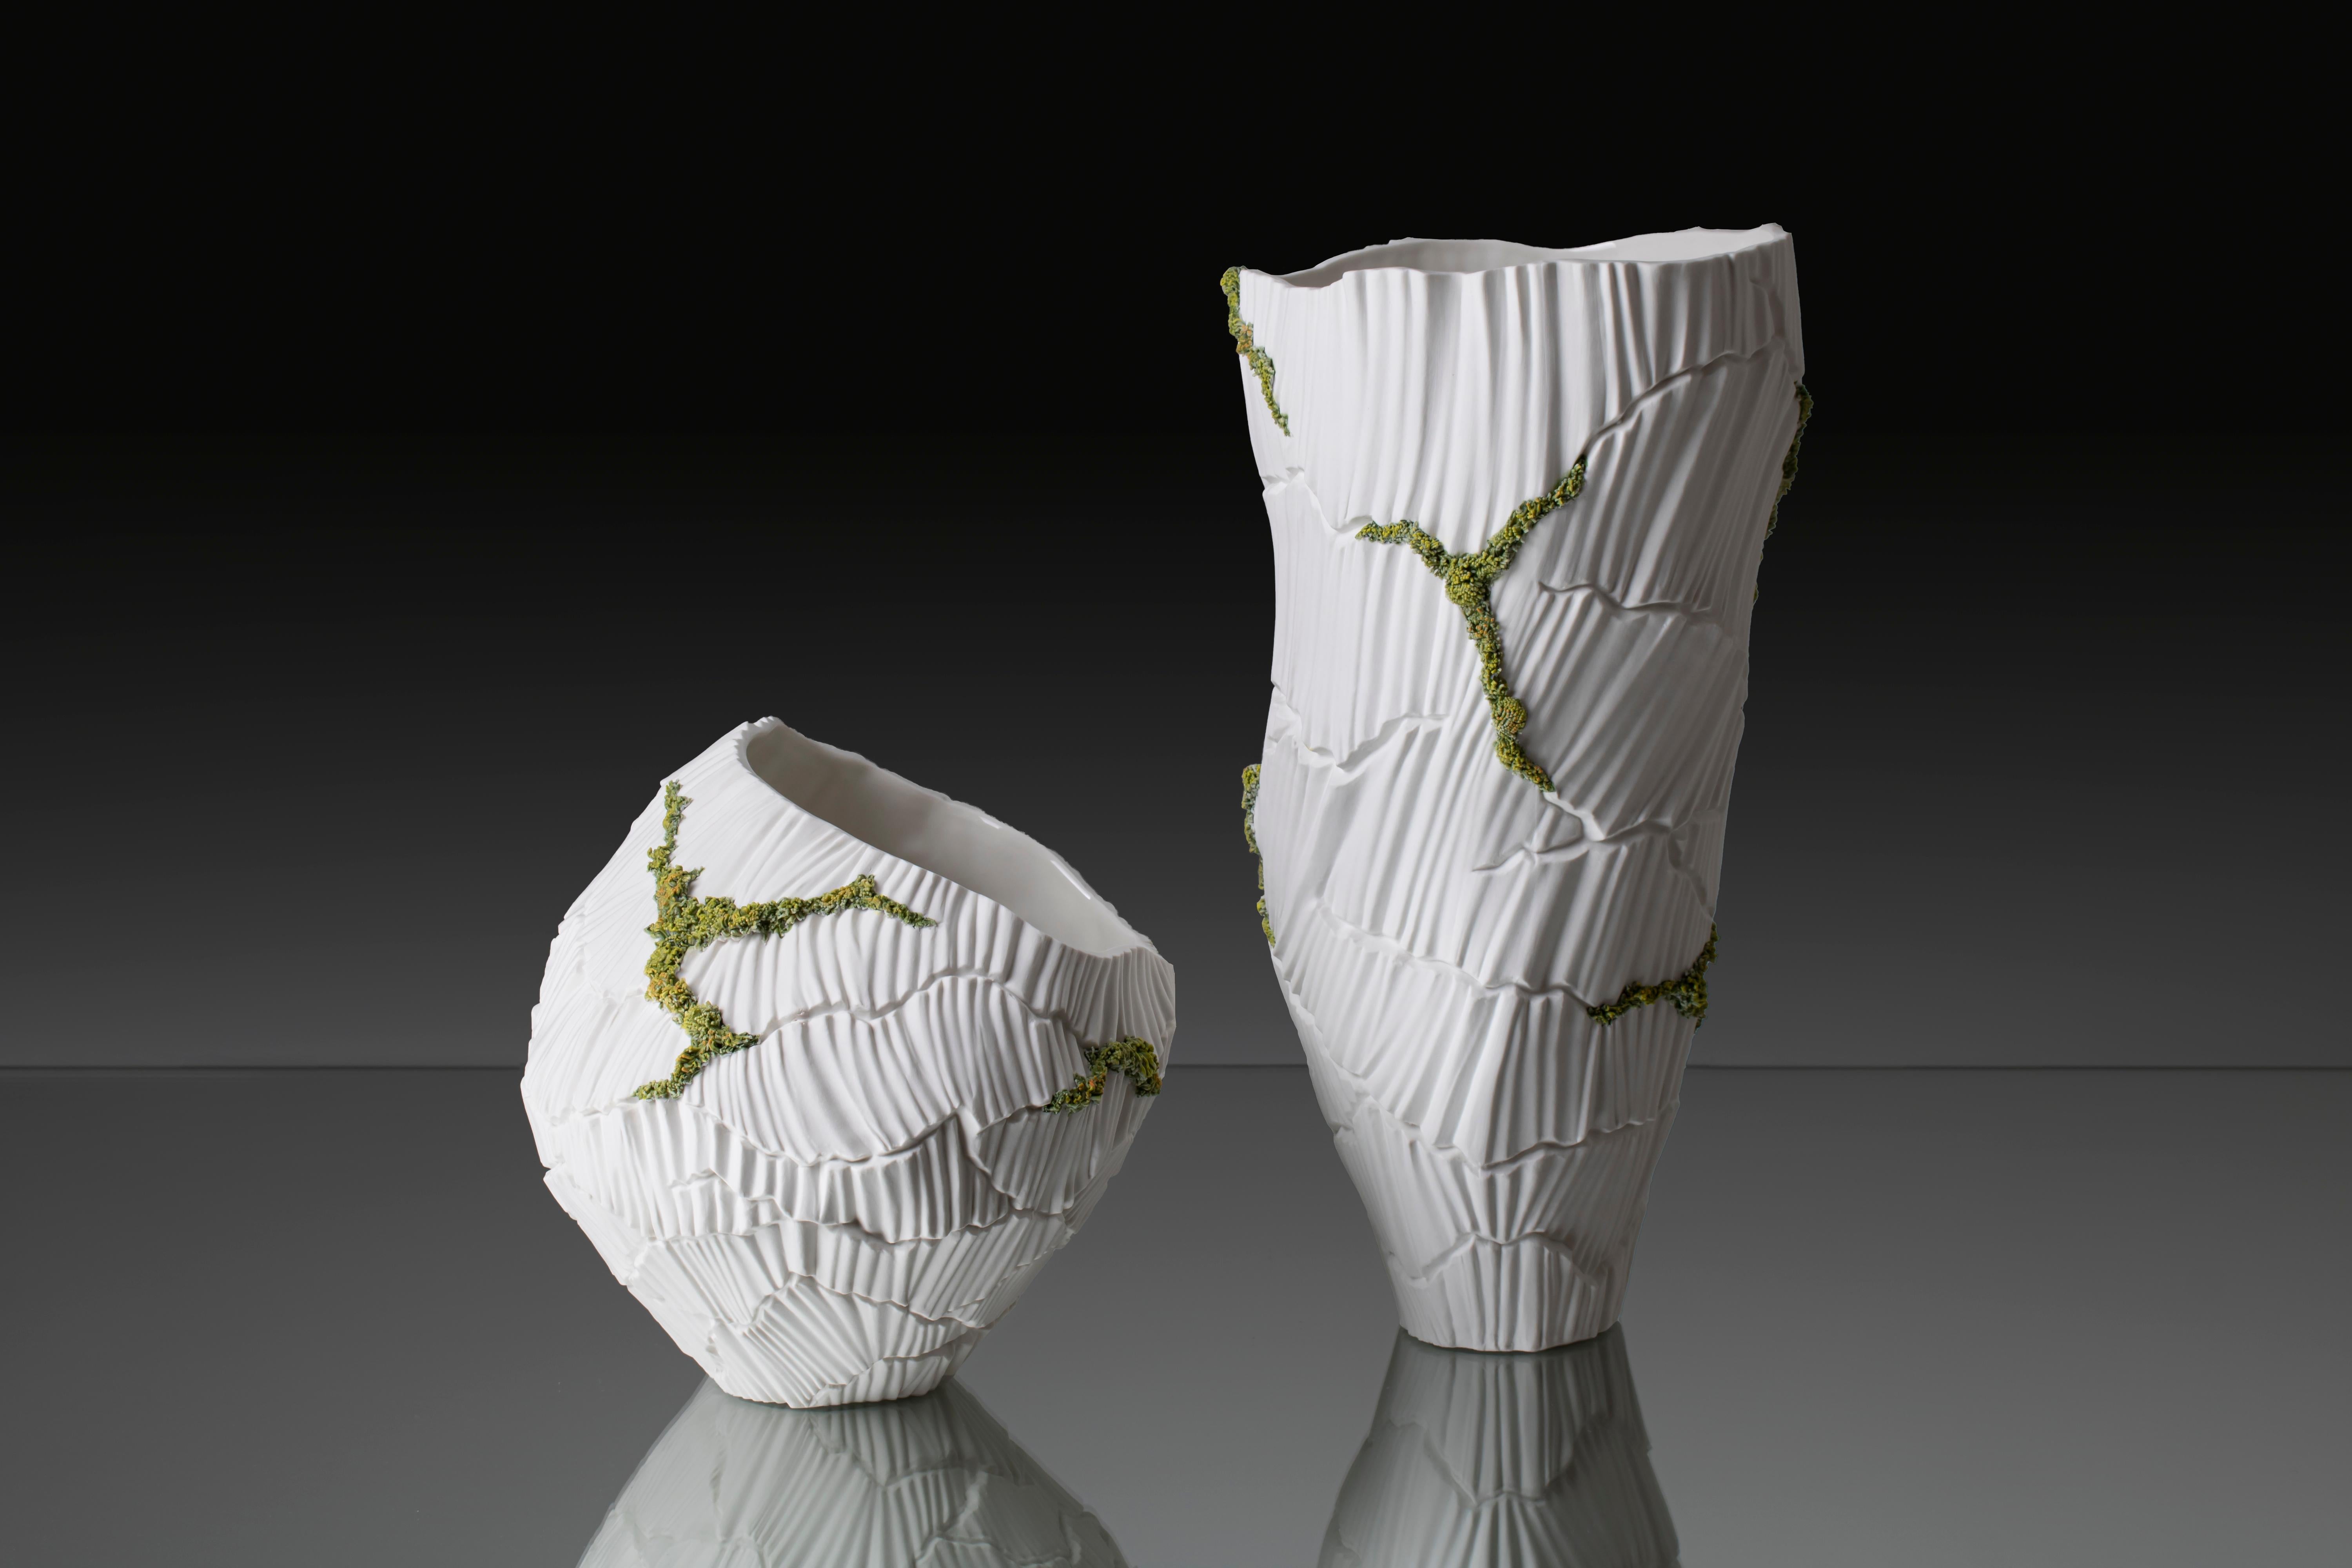 Cast Modern Porcelain Vase Green Moss White Ceramic Sculpture Hand-Painted Italy Fos For Sale